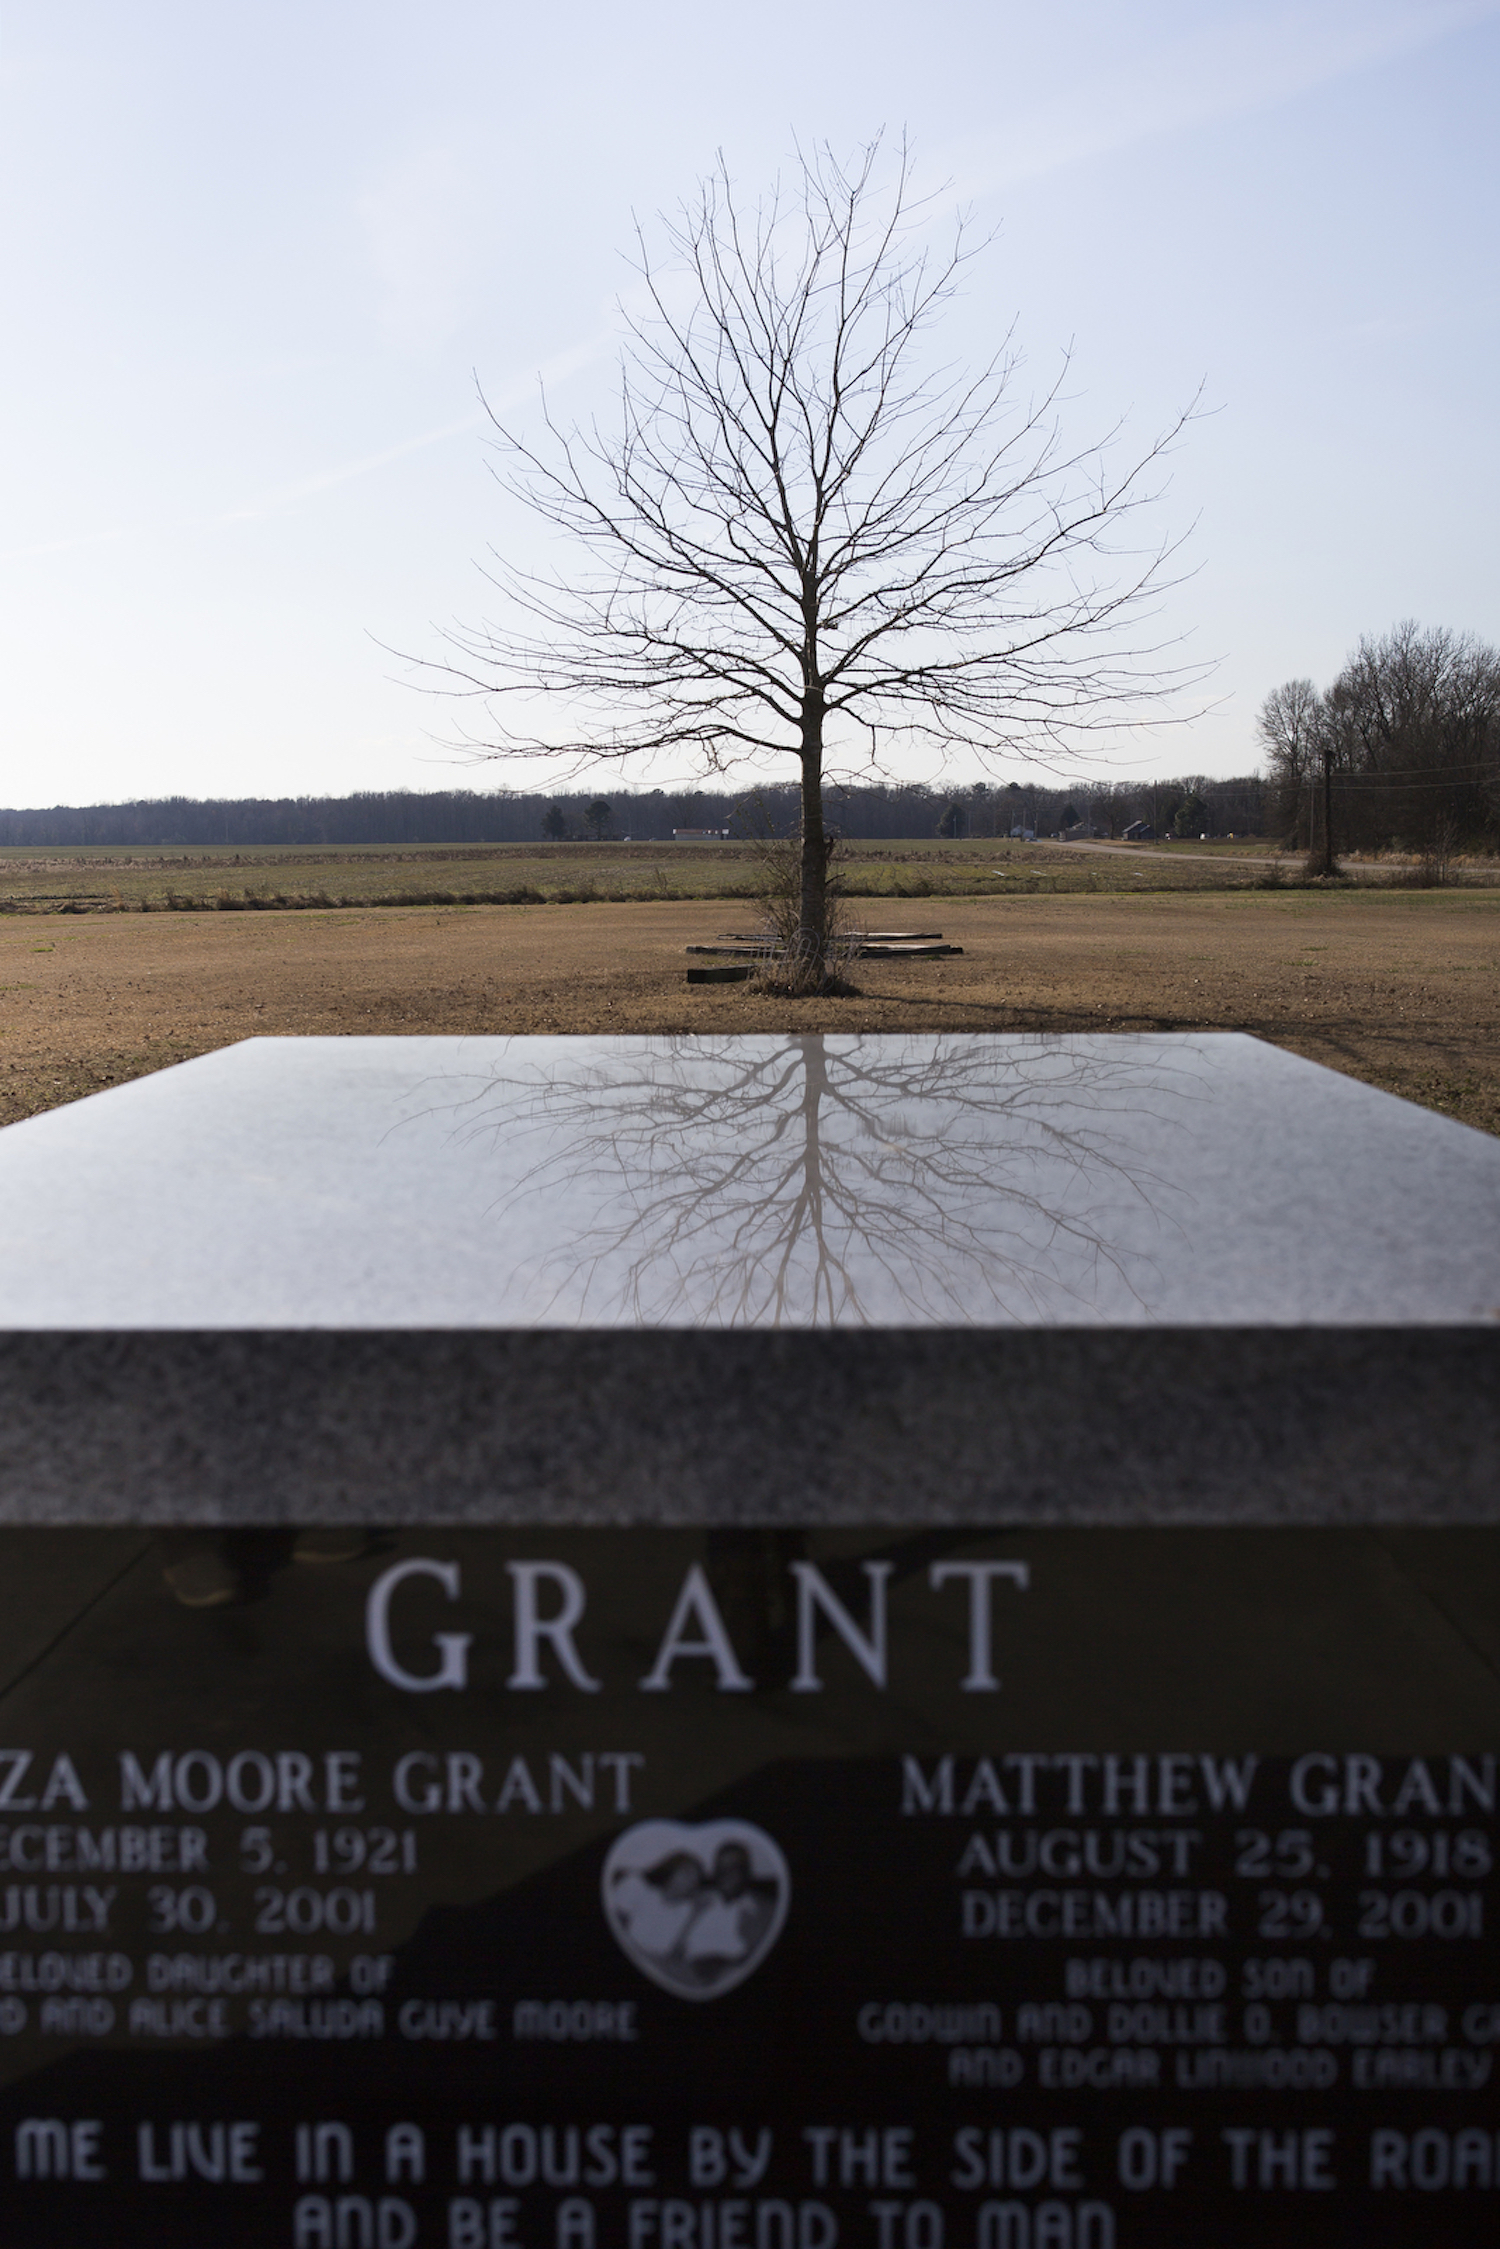 The tomb of Florenza and Matthew Grant sits on their farmland in Tillery, North Carolina